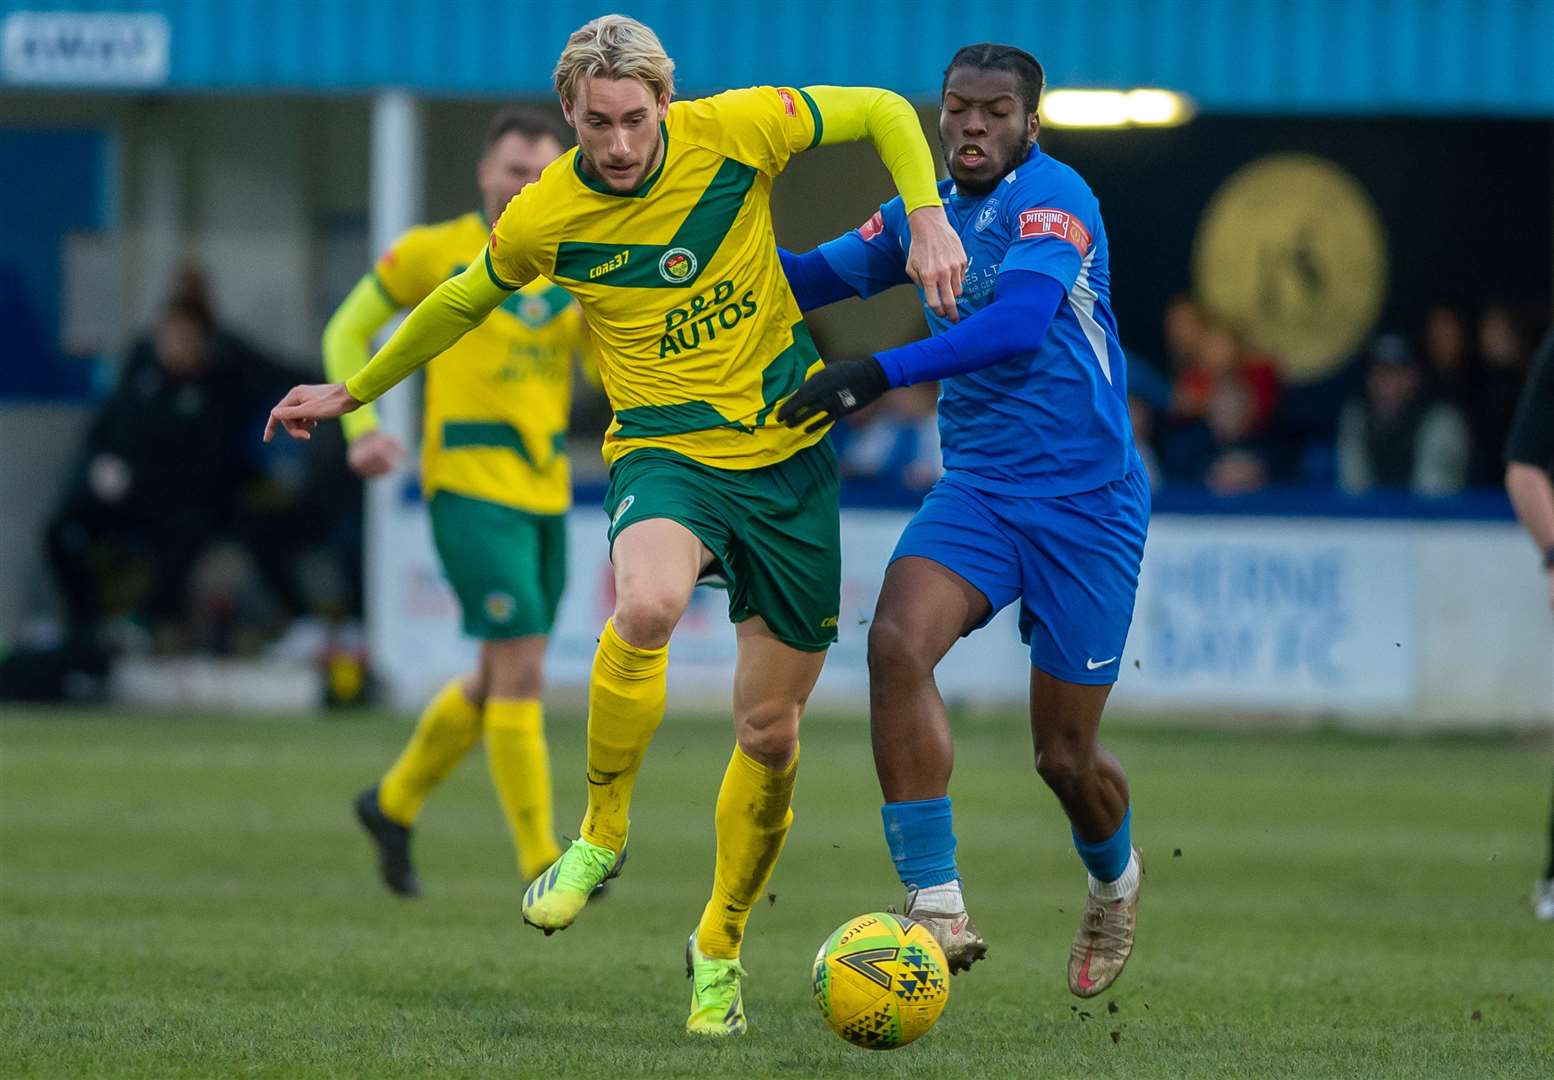 Midfielder Bode Anidugbe has left Herne Bay for Faversham. Picture: Ian Scammell